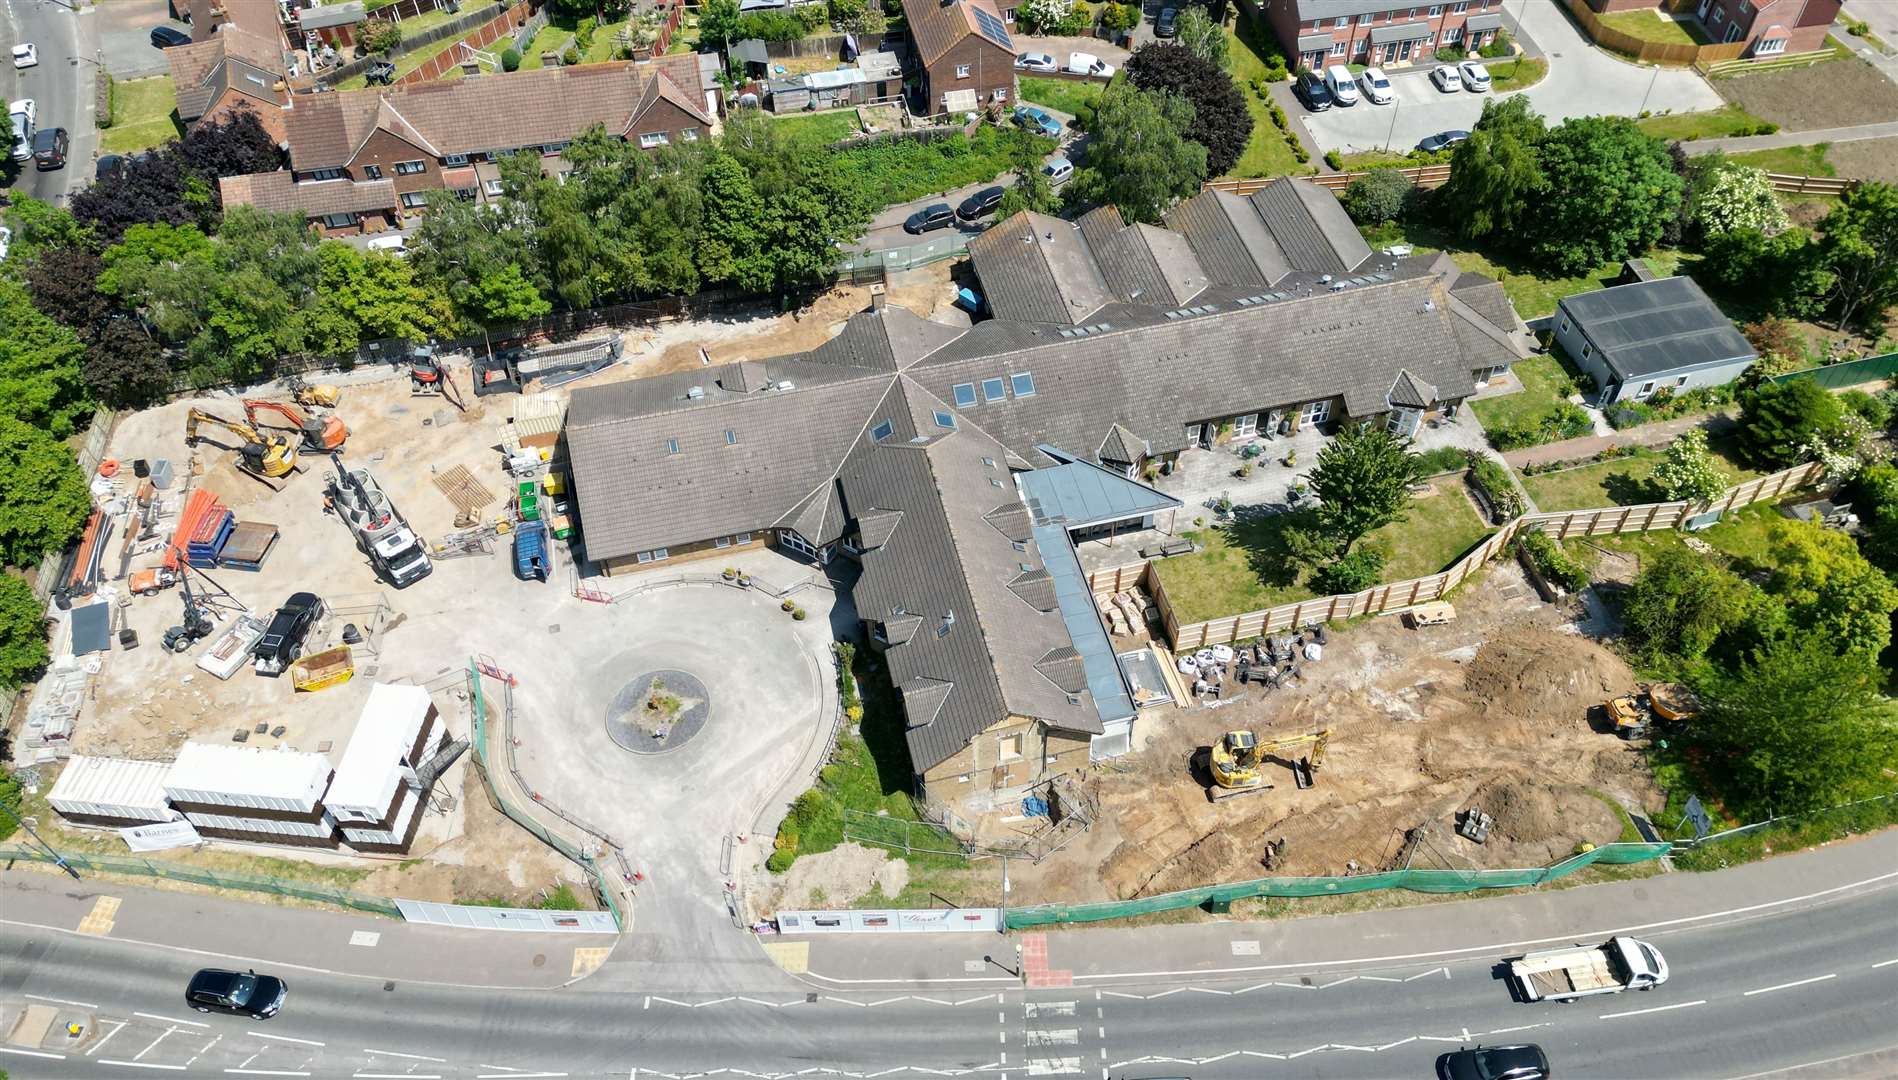 drone footage captured the new development at the ellenor hospice in Coldharbour Road, Gravesend. Picture: ellenor